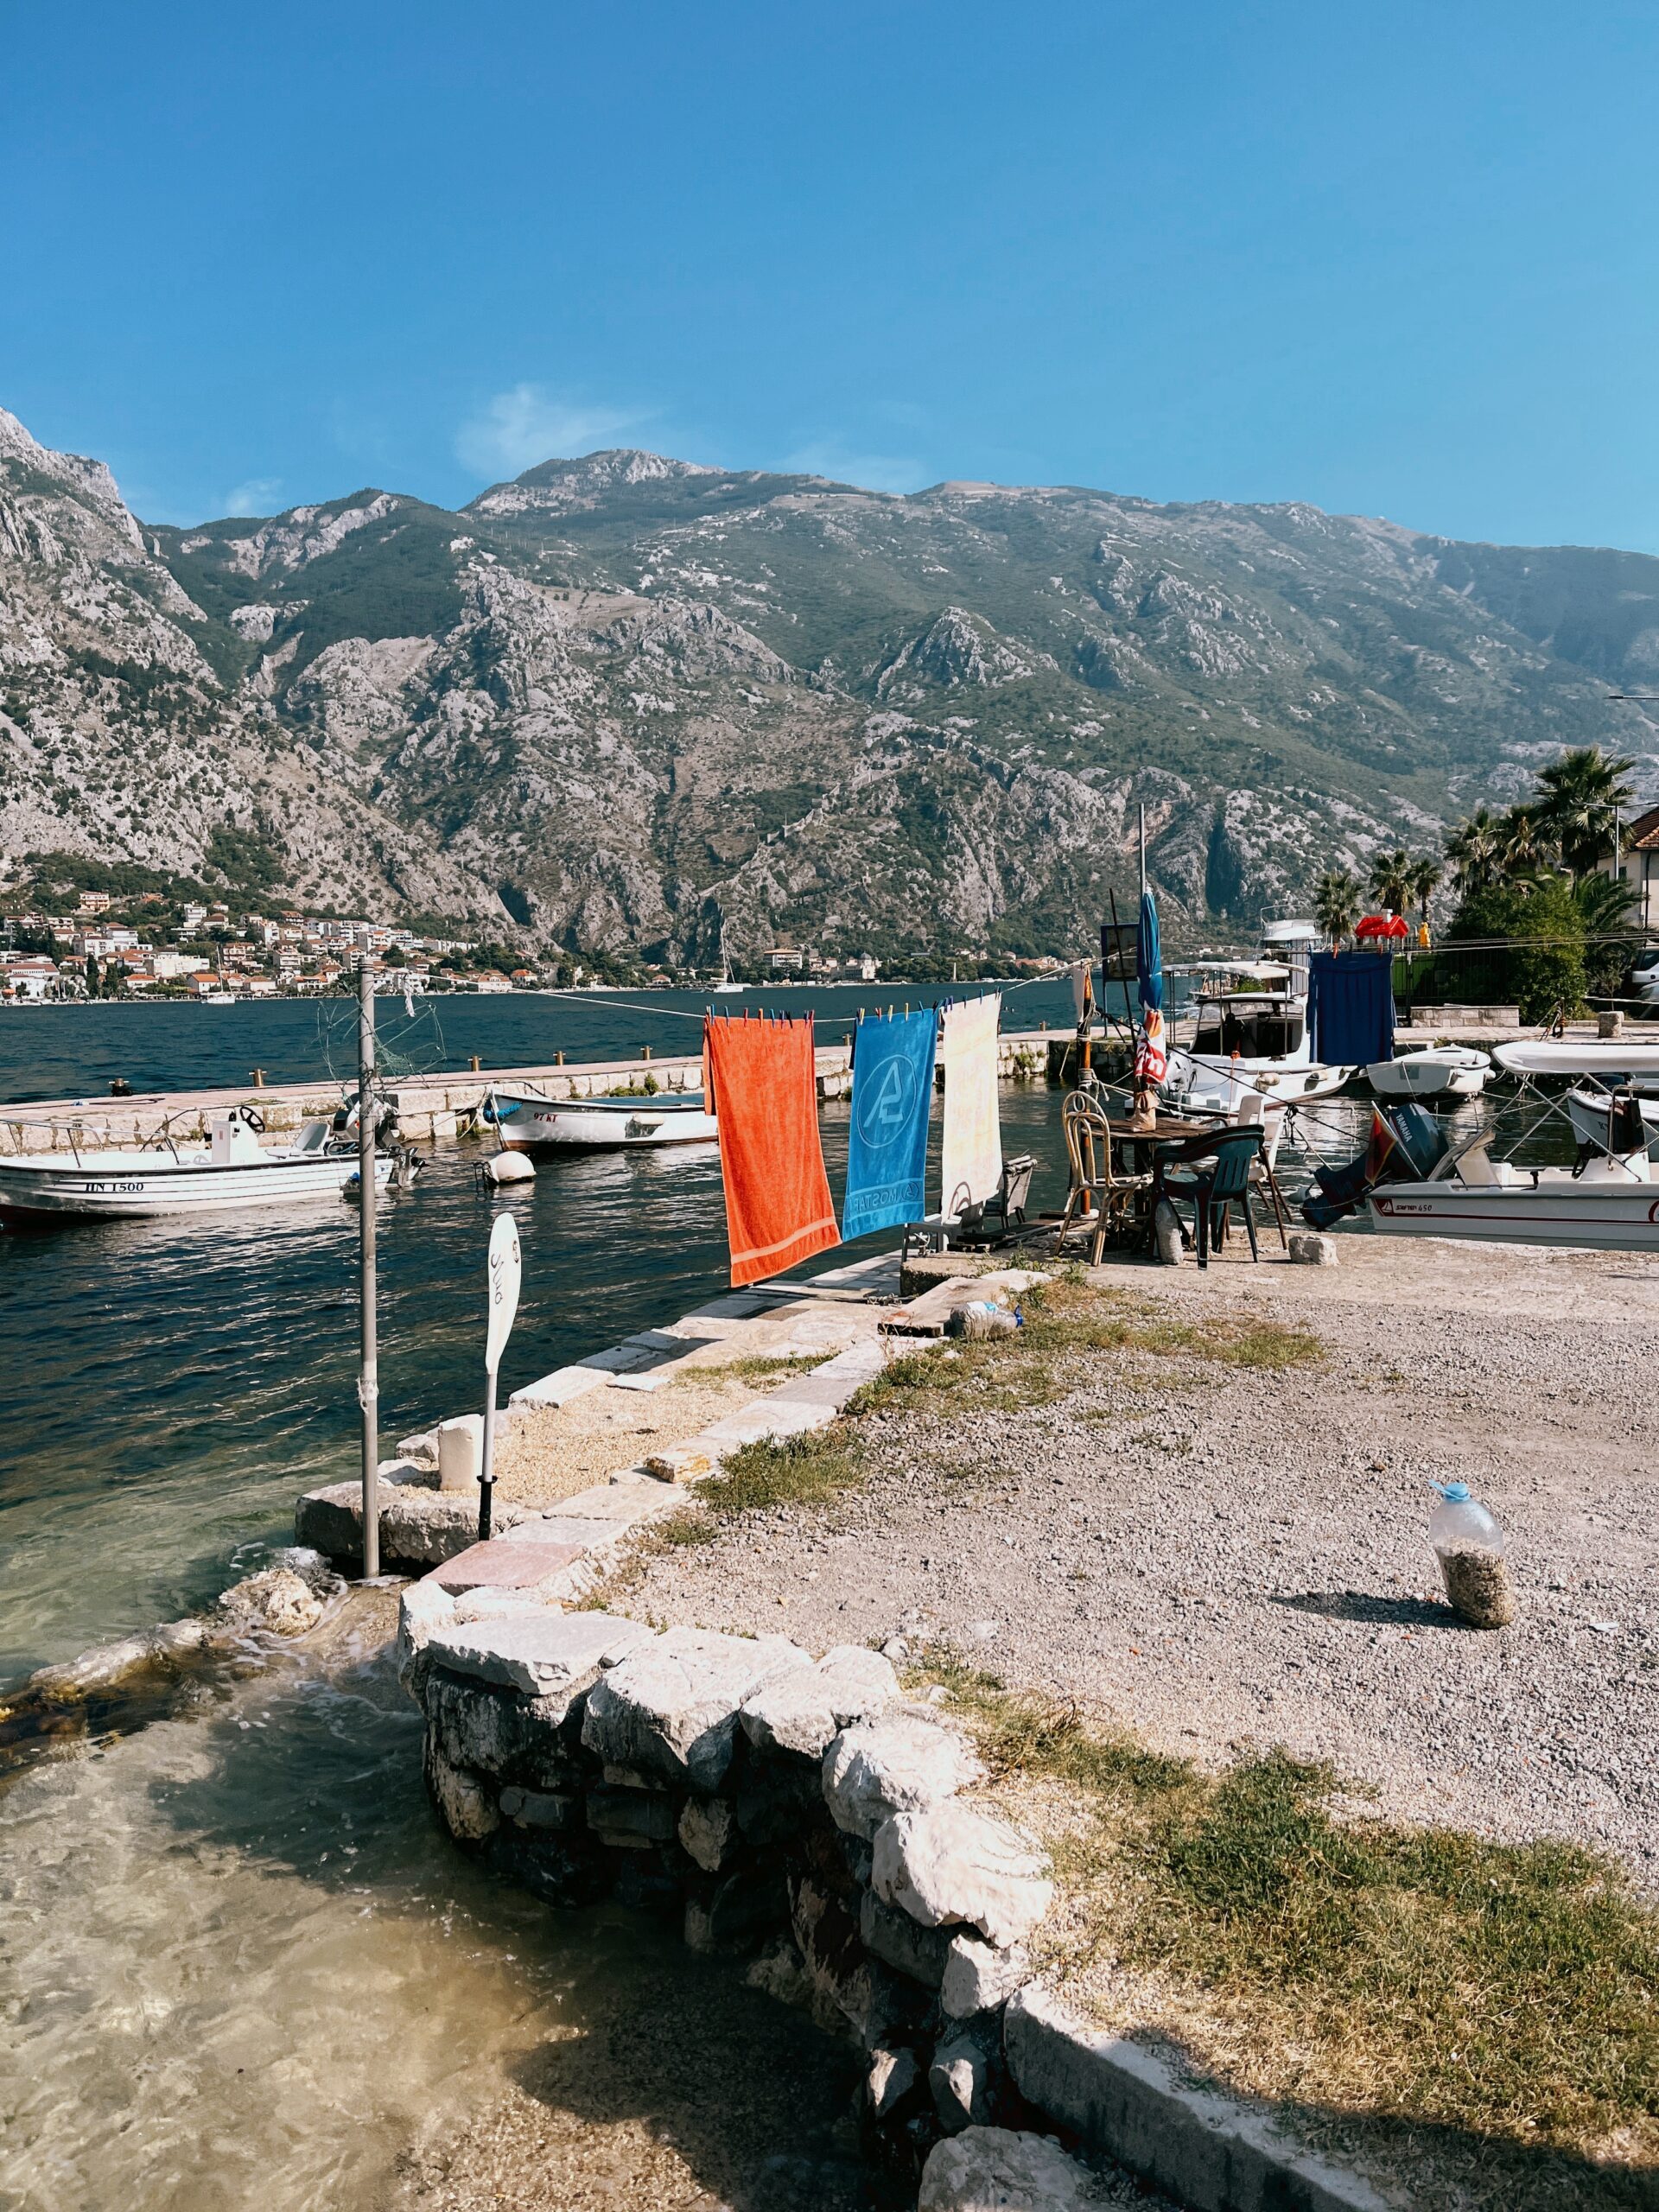 Shore side on the bay of Kotor